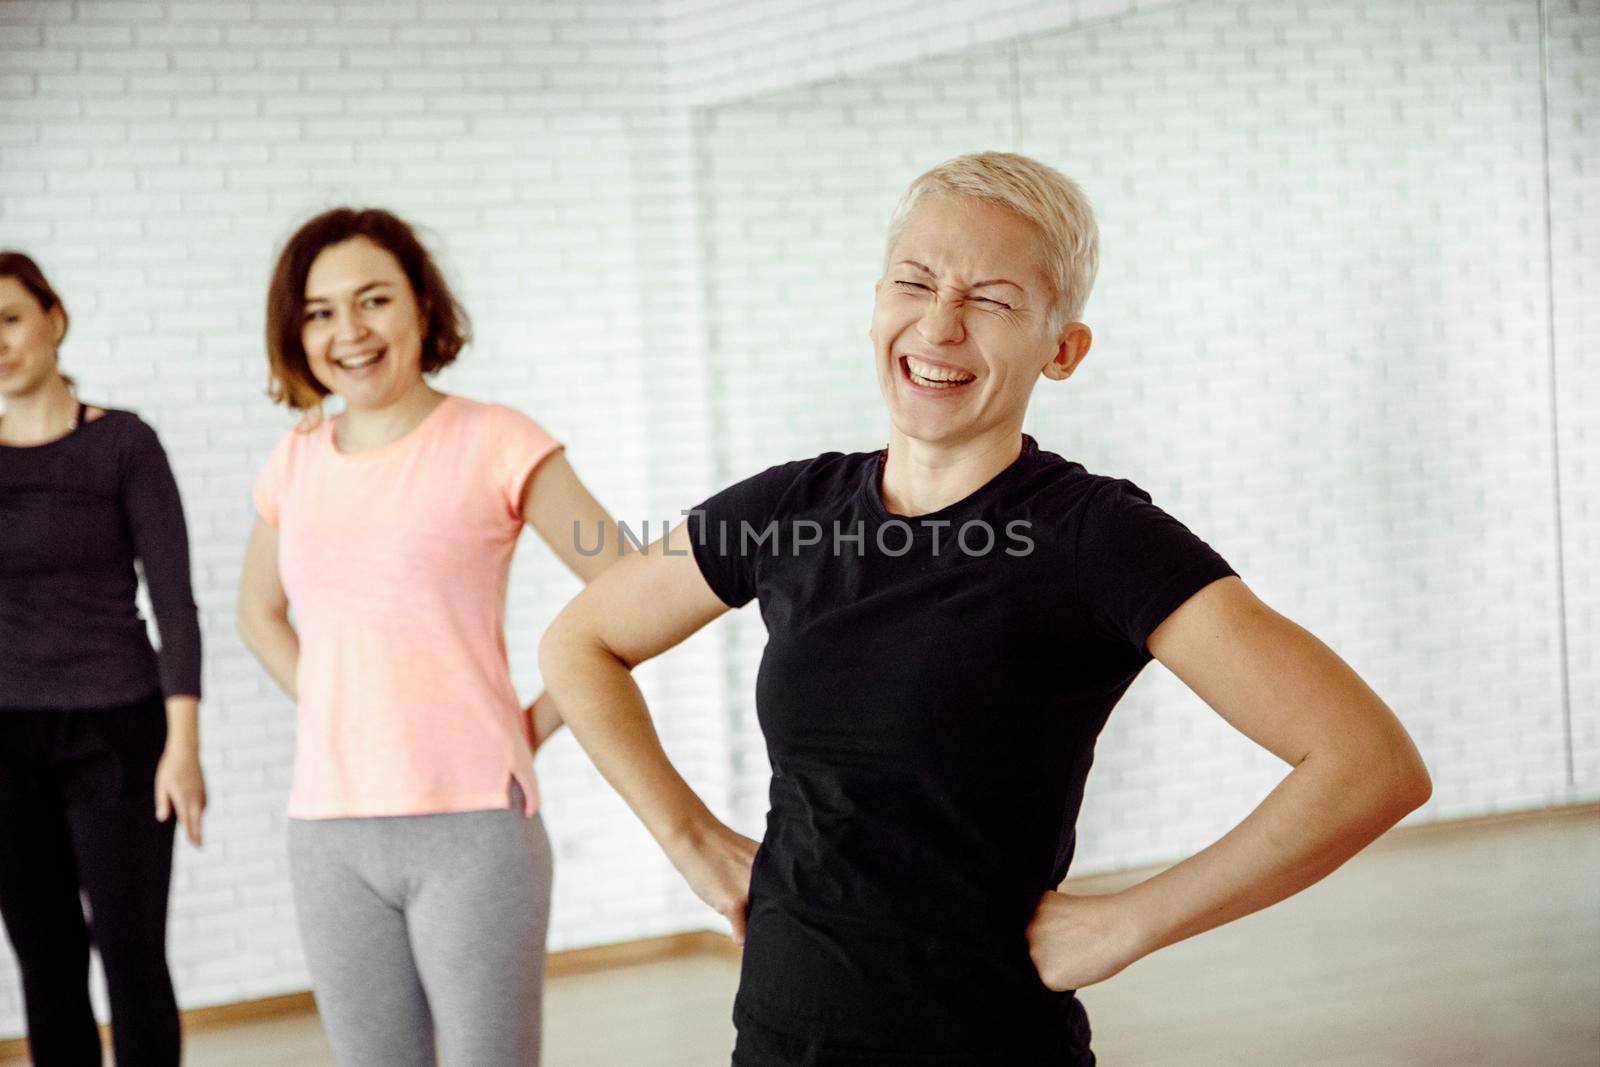 Good mood of women who are engaged in sports